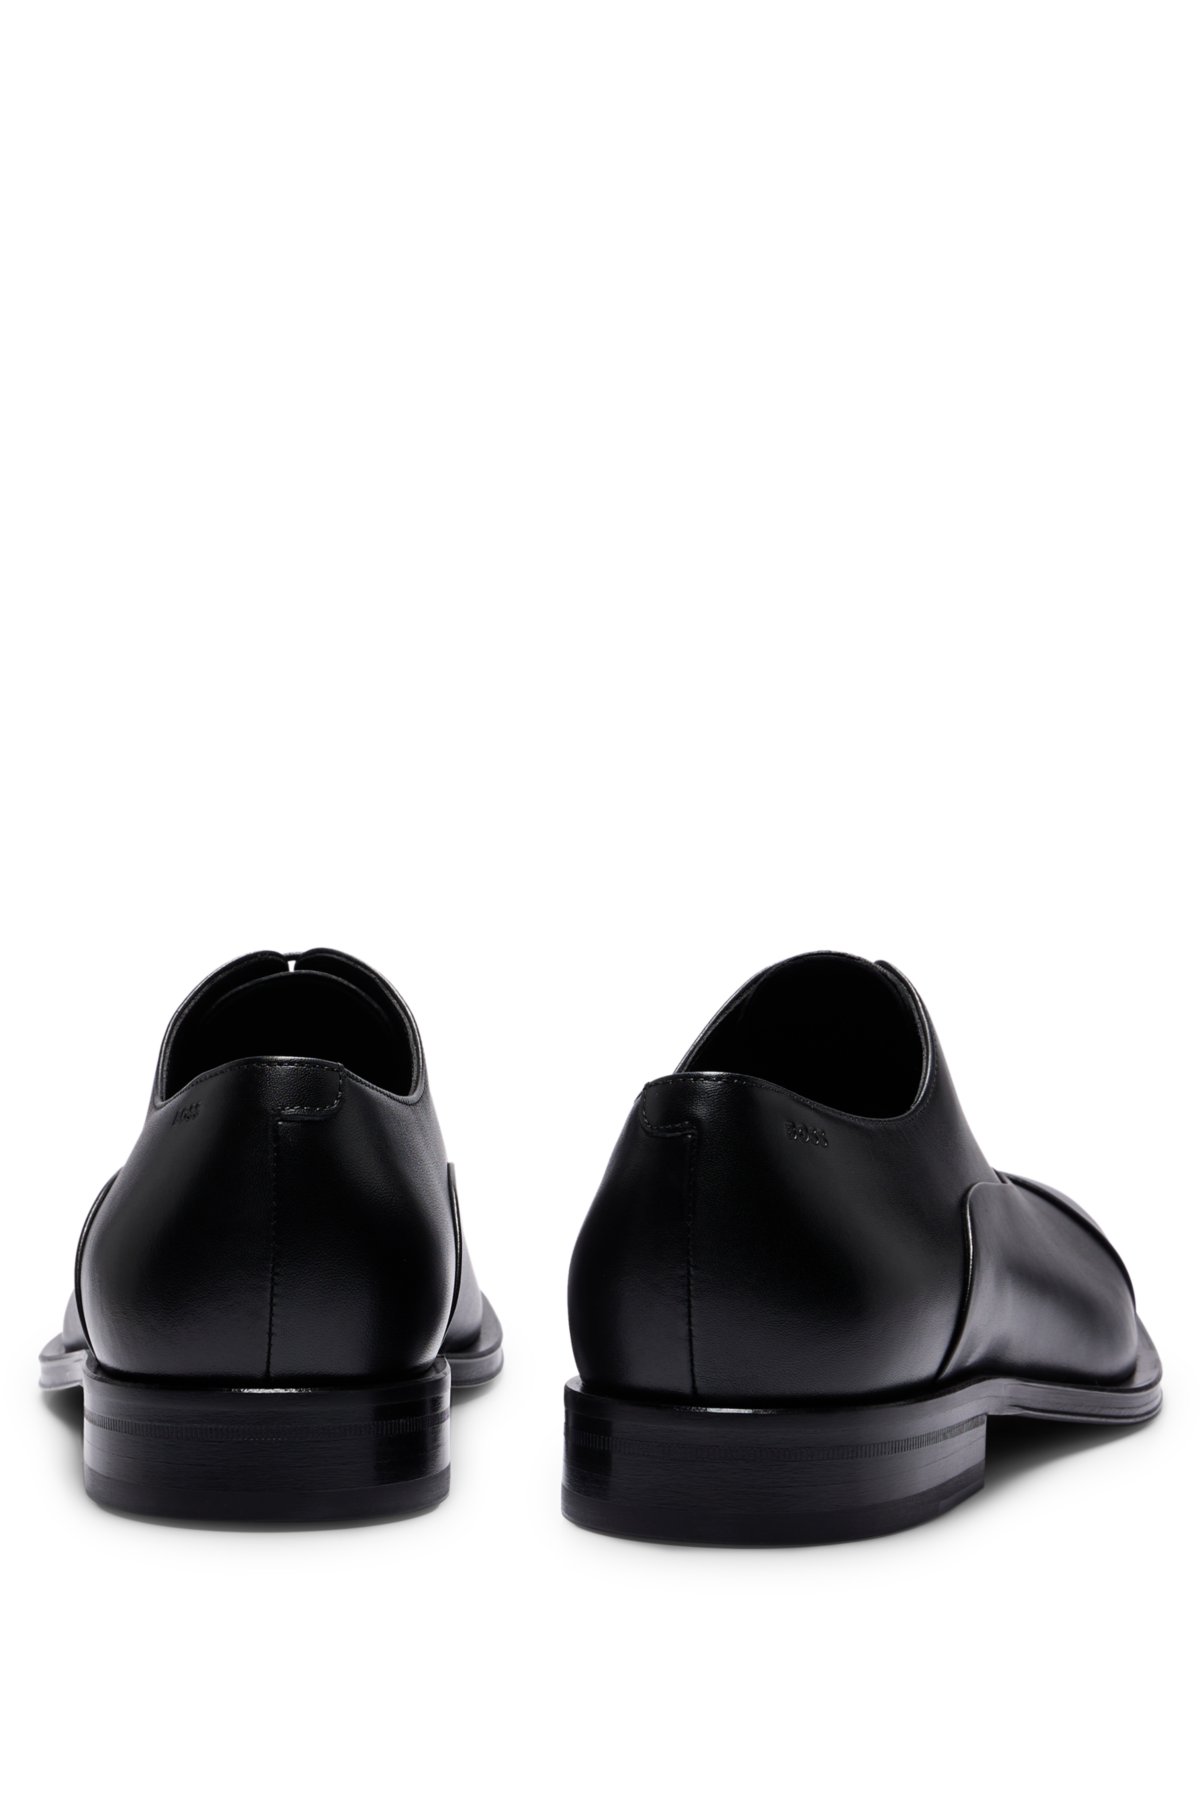 BOSS - Italian-made leather Oxford shoes with branding